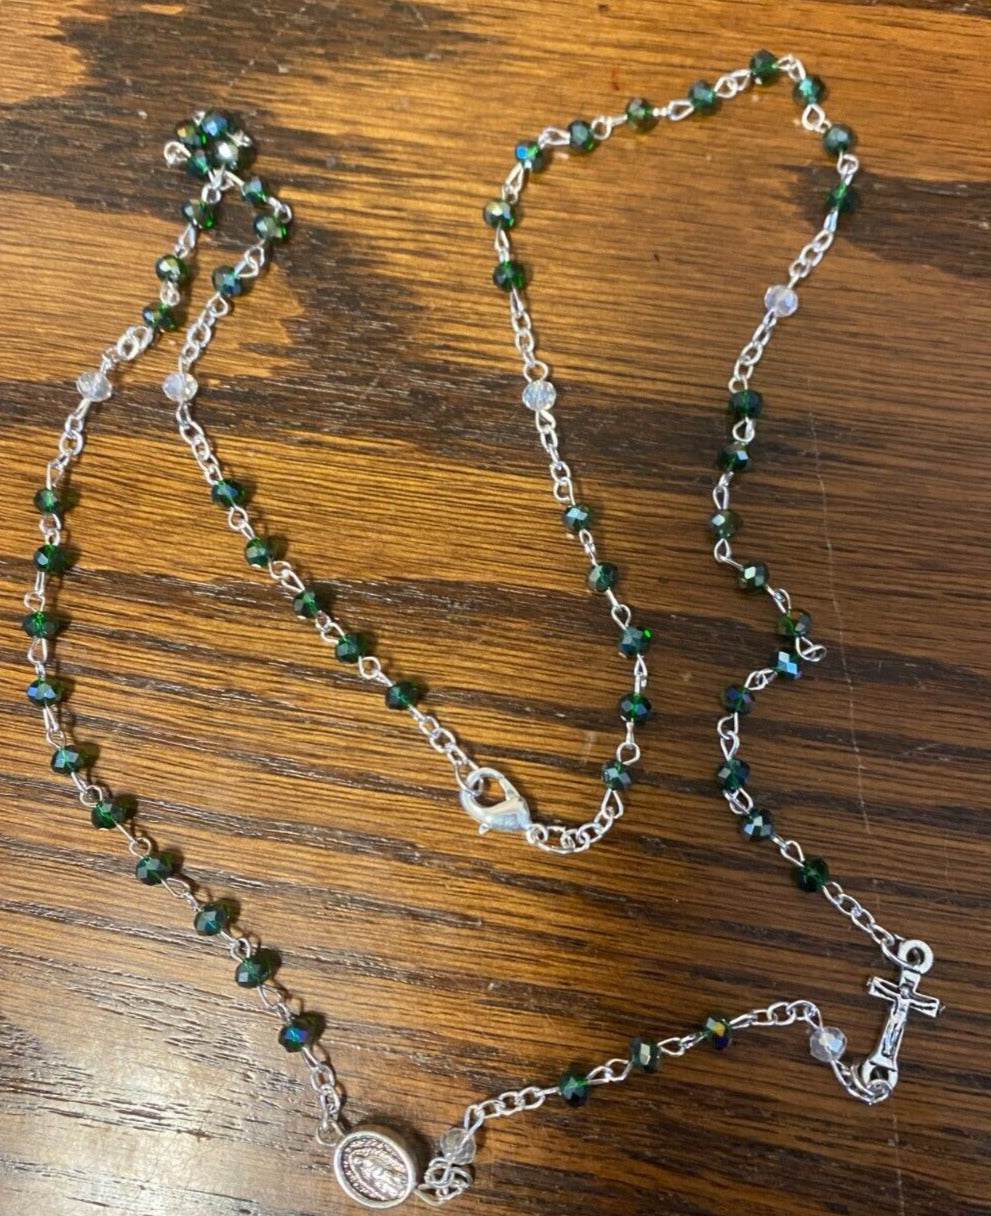 Our Lady of Guadalupe Green Glass Beads Rosary Necklace, New - Bob and Penny Lord